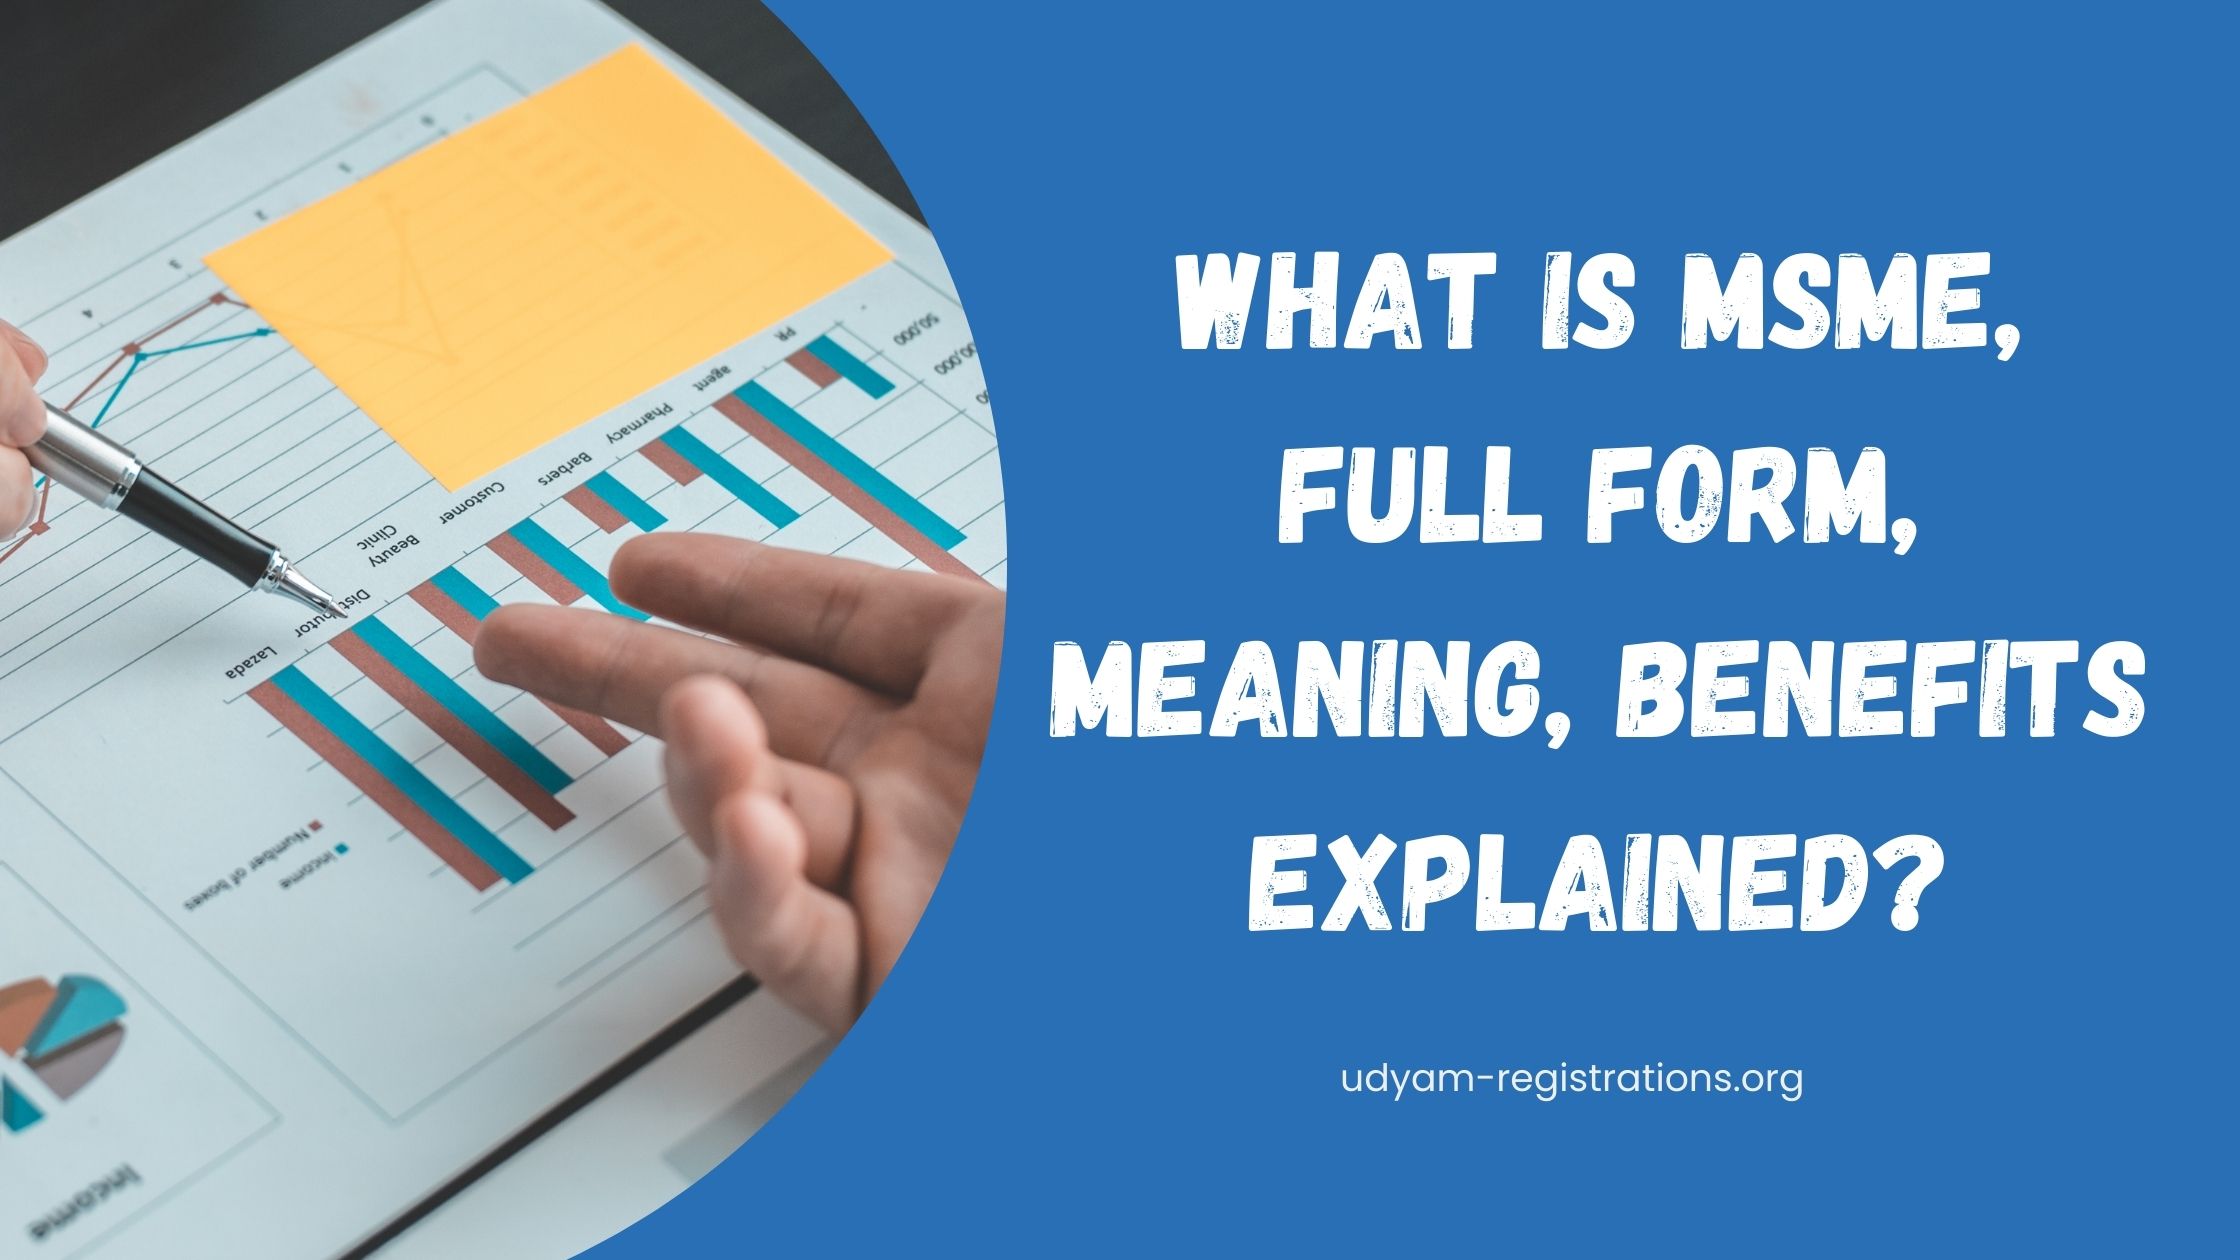 What is MSME, Full Form, Meaning, Benefits?